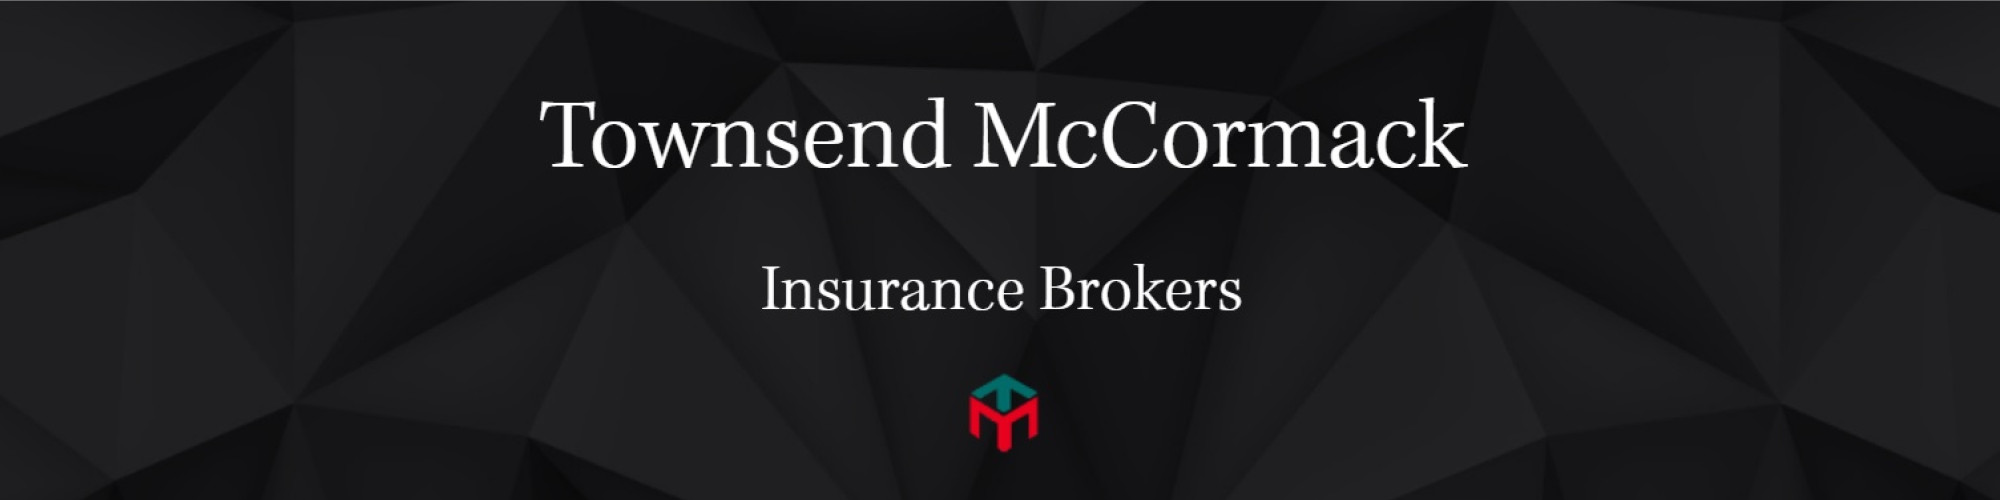 TOWNSEND MCCORMACK INSURANCE BROKERS